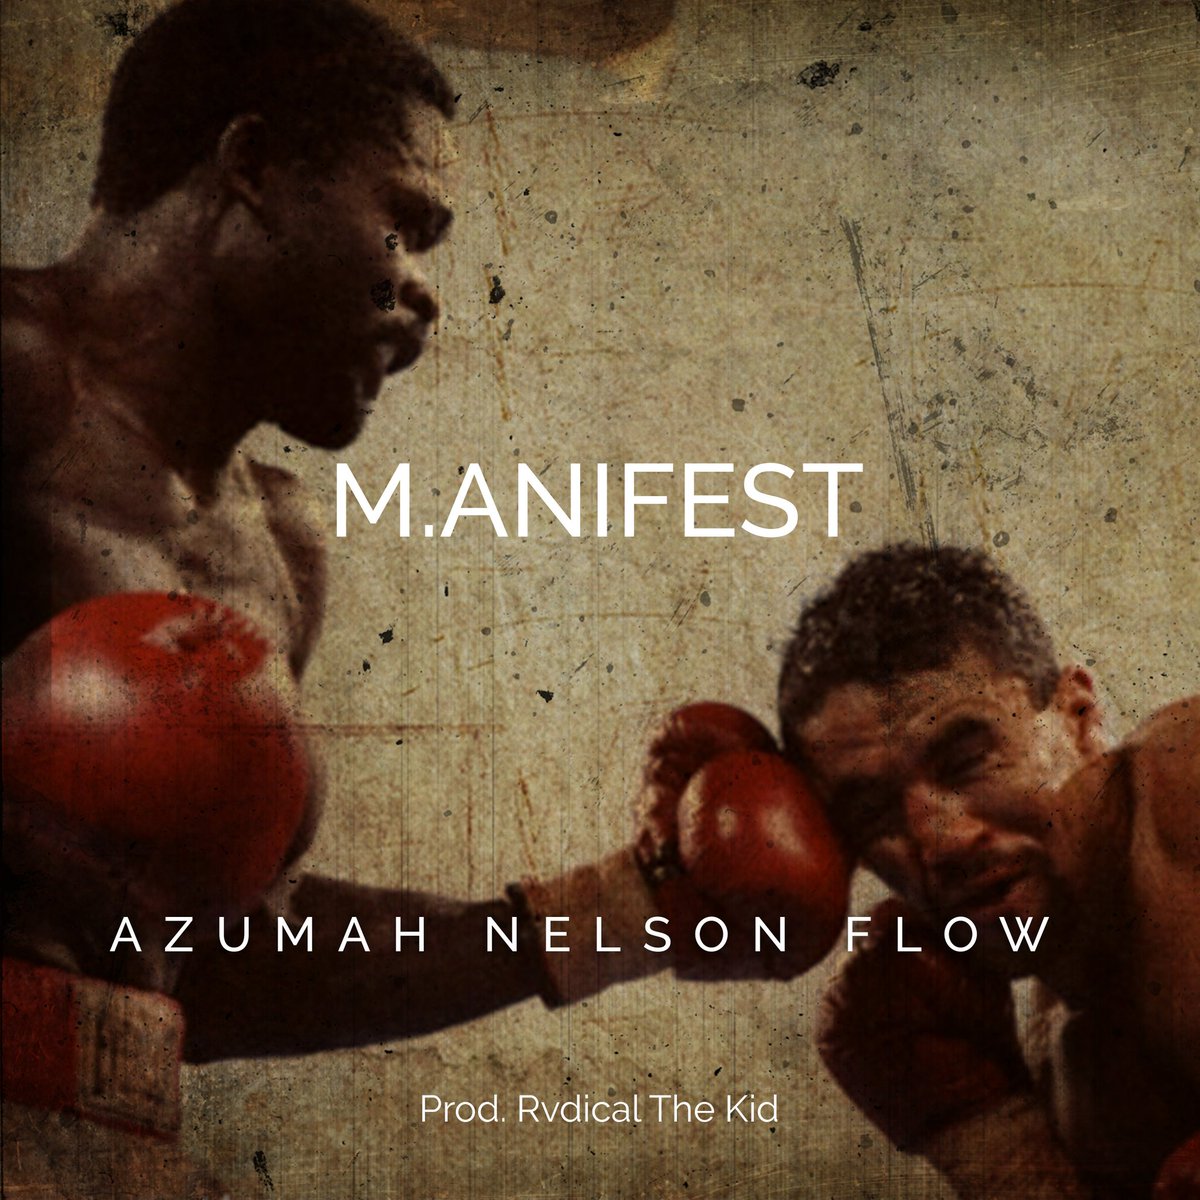 Manifest – Azumah Nelson Flow (Prod. by Rvdical The Kid)